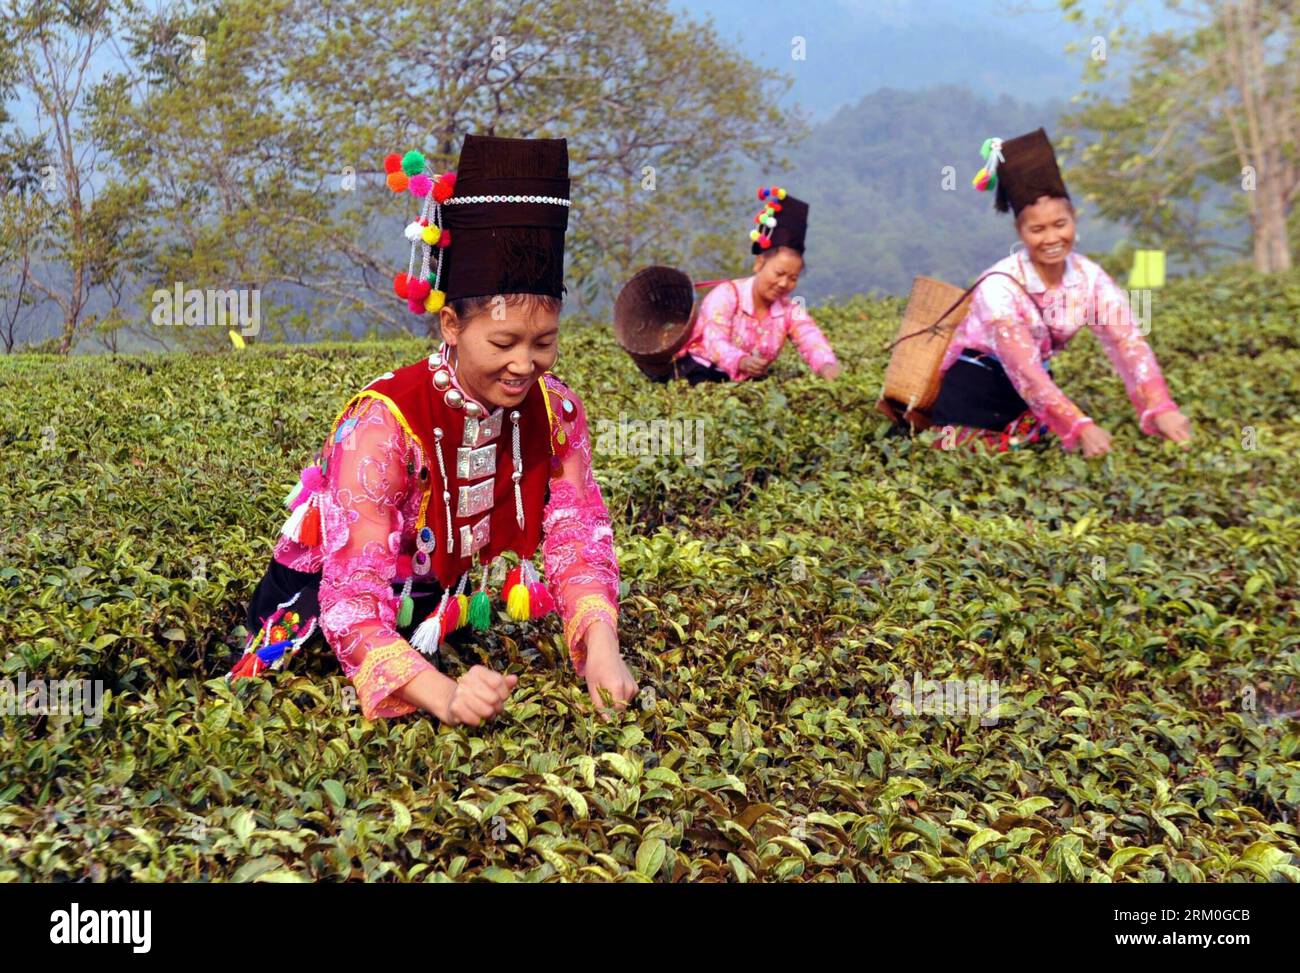 Bildnummer: 59414912  Datum: 22.03.2013  Copyright: imago/Xinhua (130323) -- LIANGHE, March 22, 2013 (Xinhua) -- Women of the Achang ethnic group pick up spring tea leaves in Guanzhang Village of Xiangsong Township in Lianghe County, southwest China s Yunnan Province, March 22, 2013. As the spring comes, tea farmers here are busy with picking up tea leaves. (Xinhua/Chen Haining) (lfj) CHINA-YUNNAN-LIANGHE-TEA HARVEST (CN) PUBLICATIONxNOTxINxCHN Landwirtschaft ethnische Minderheit Teeernte Ernte x0x xrj 2013 quer     59414912 Date 22 03 2013 Copyright Imago XINHUA  Lianghe March 22 2013 XINHUA Stock Photo